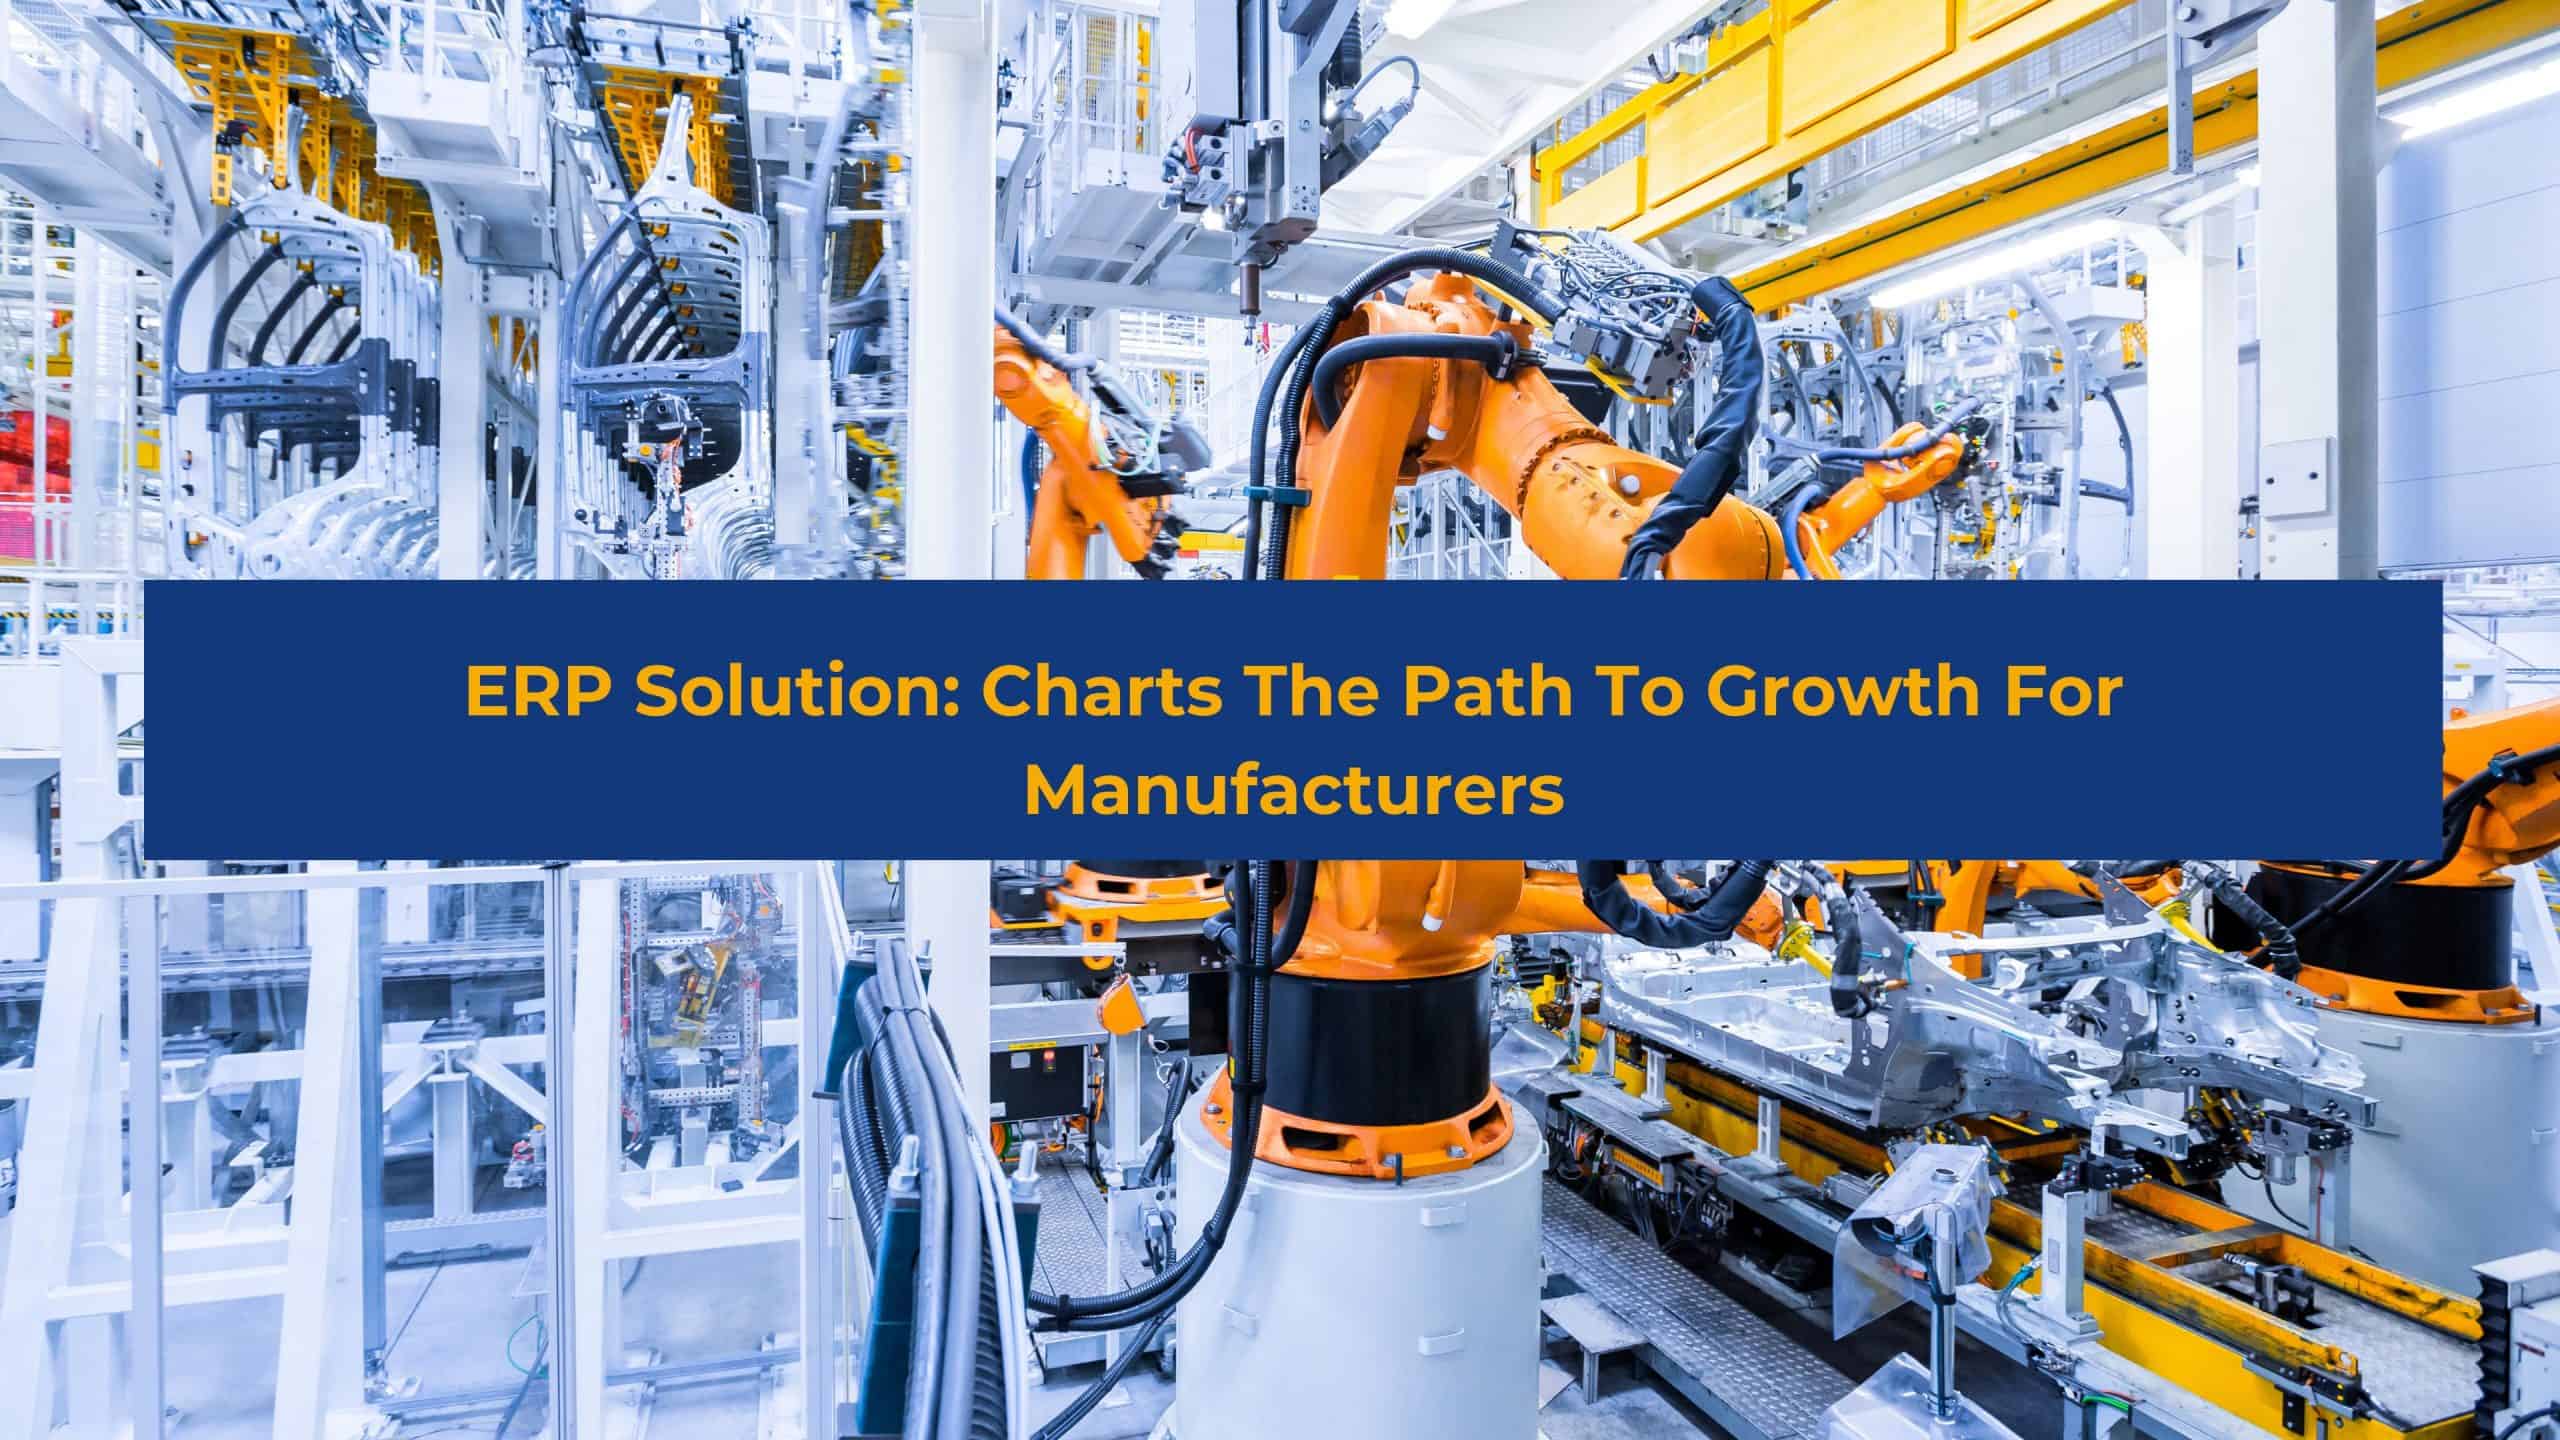 ERP Solution: Charts The Path To Growth For Manufacturers